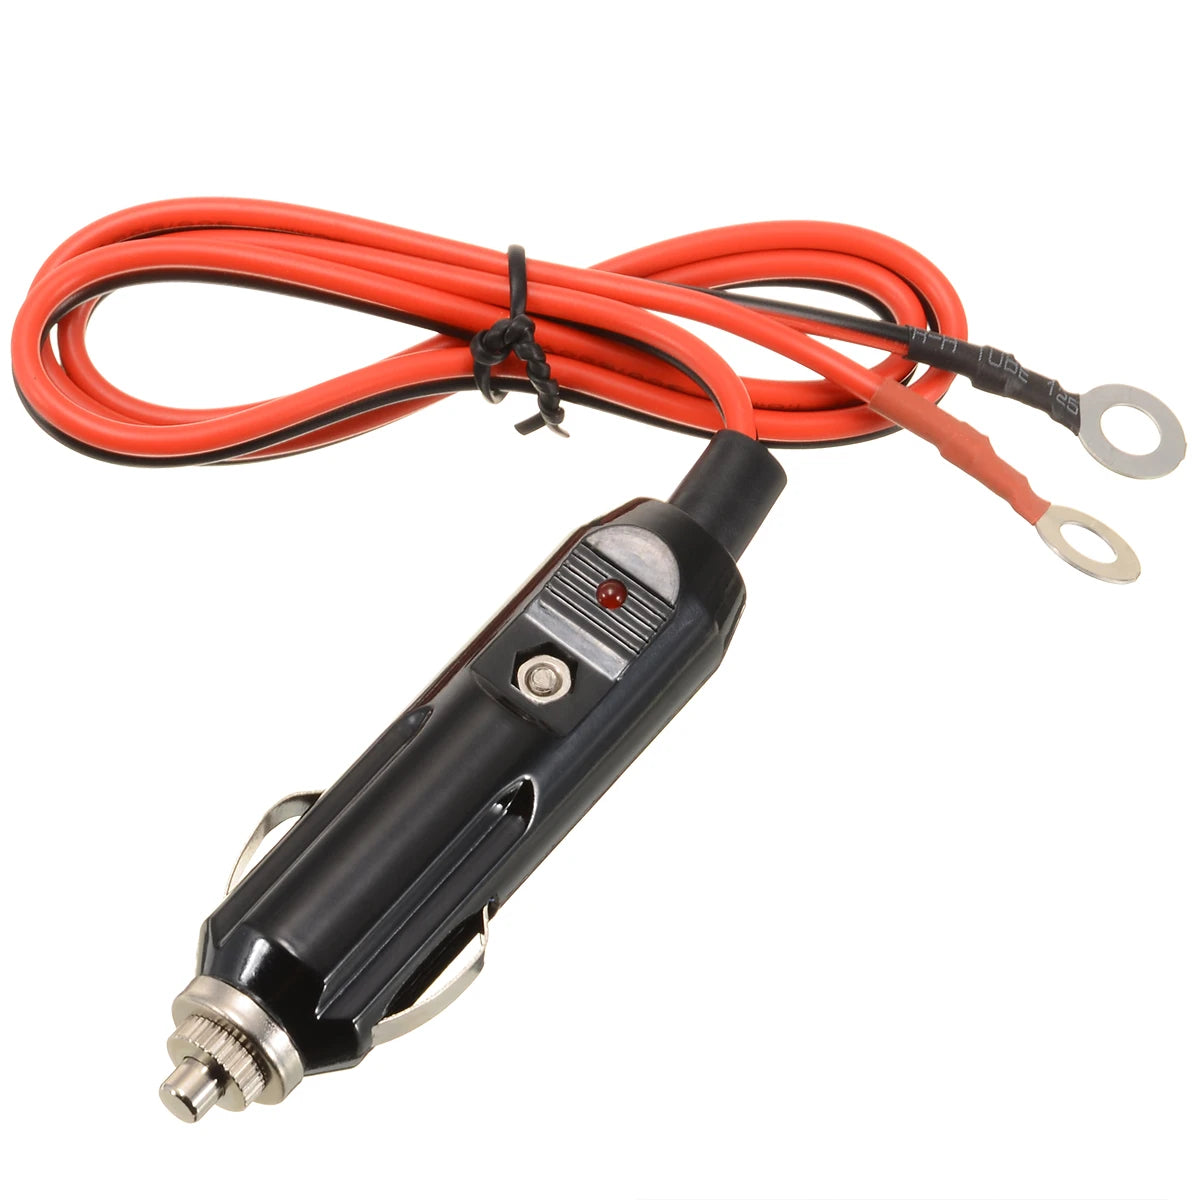 12V Vehicle Cigarette Lighter Cable Adapter for Inverter. Heavy Duty 15A